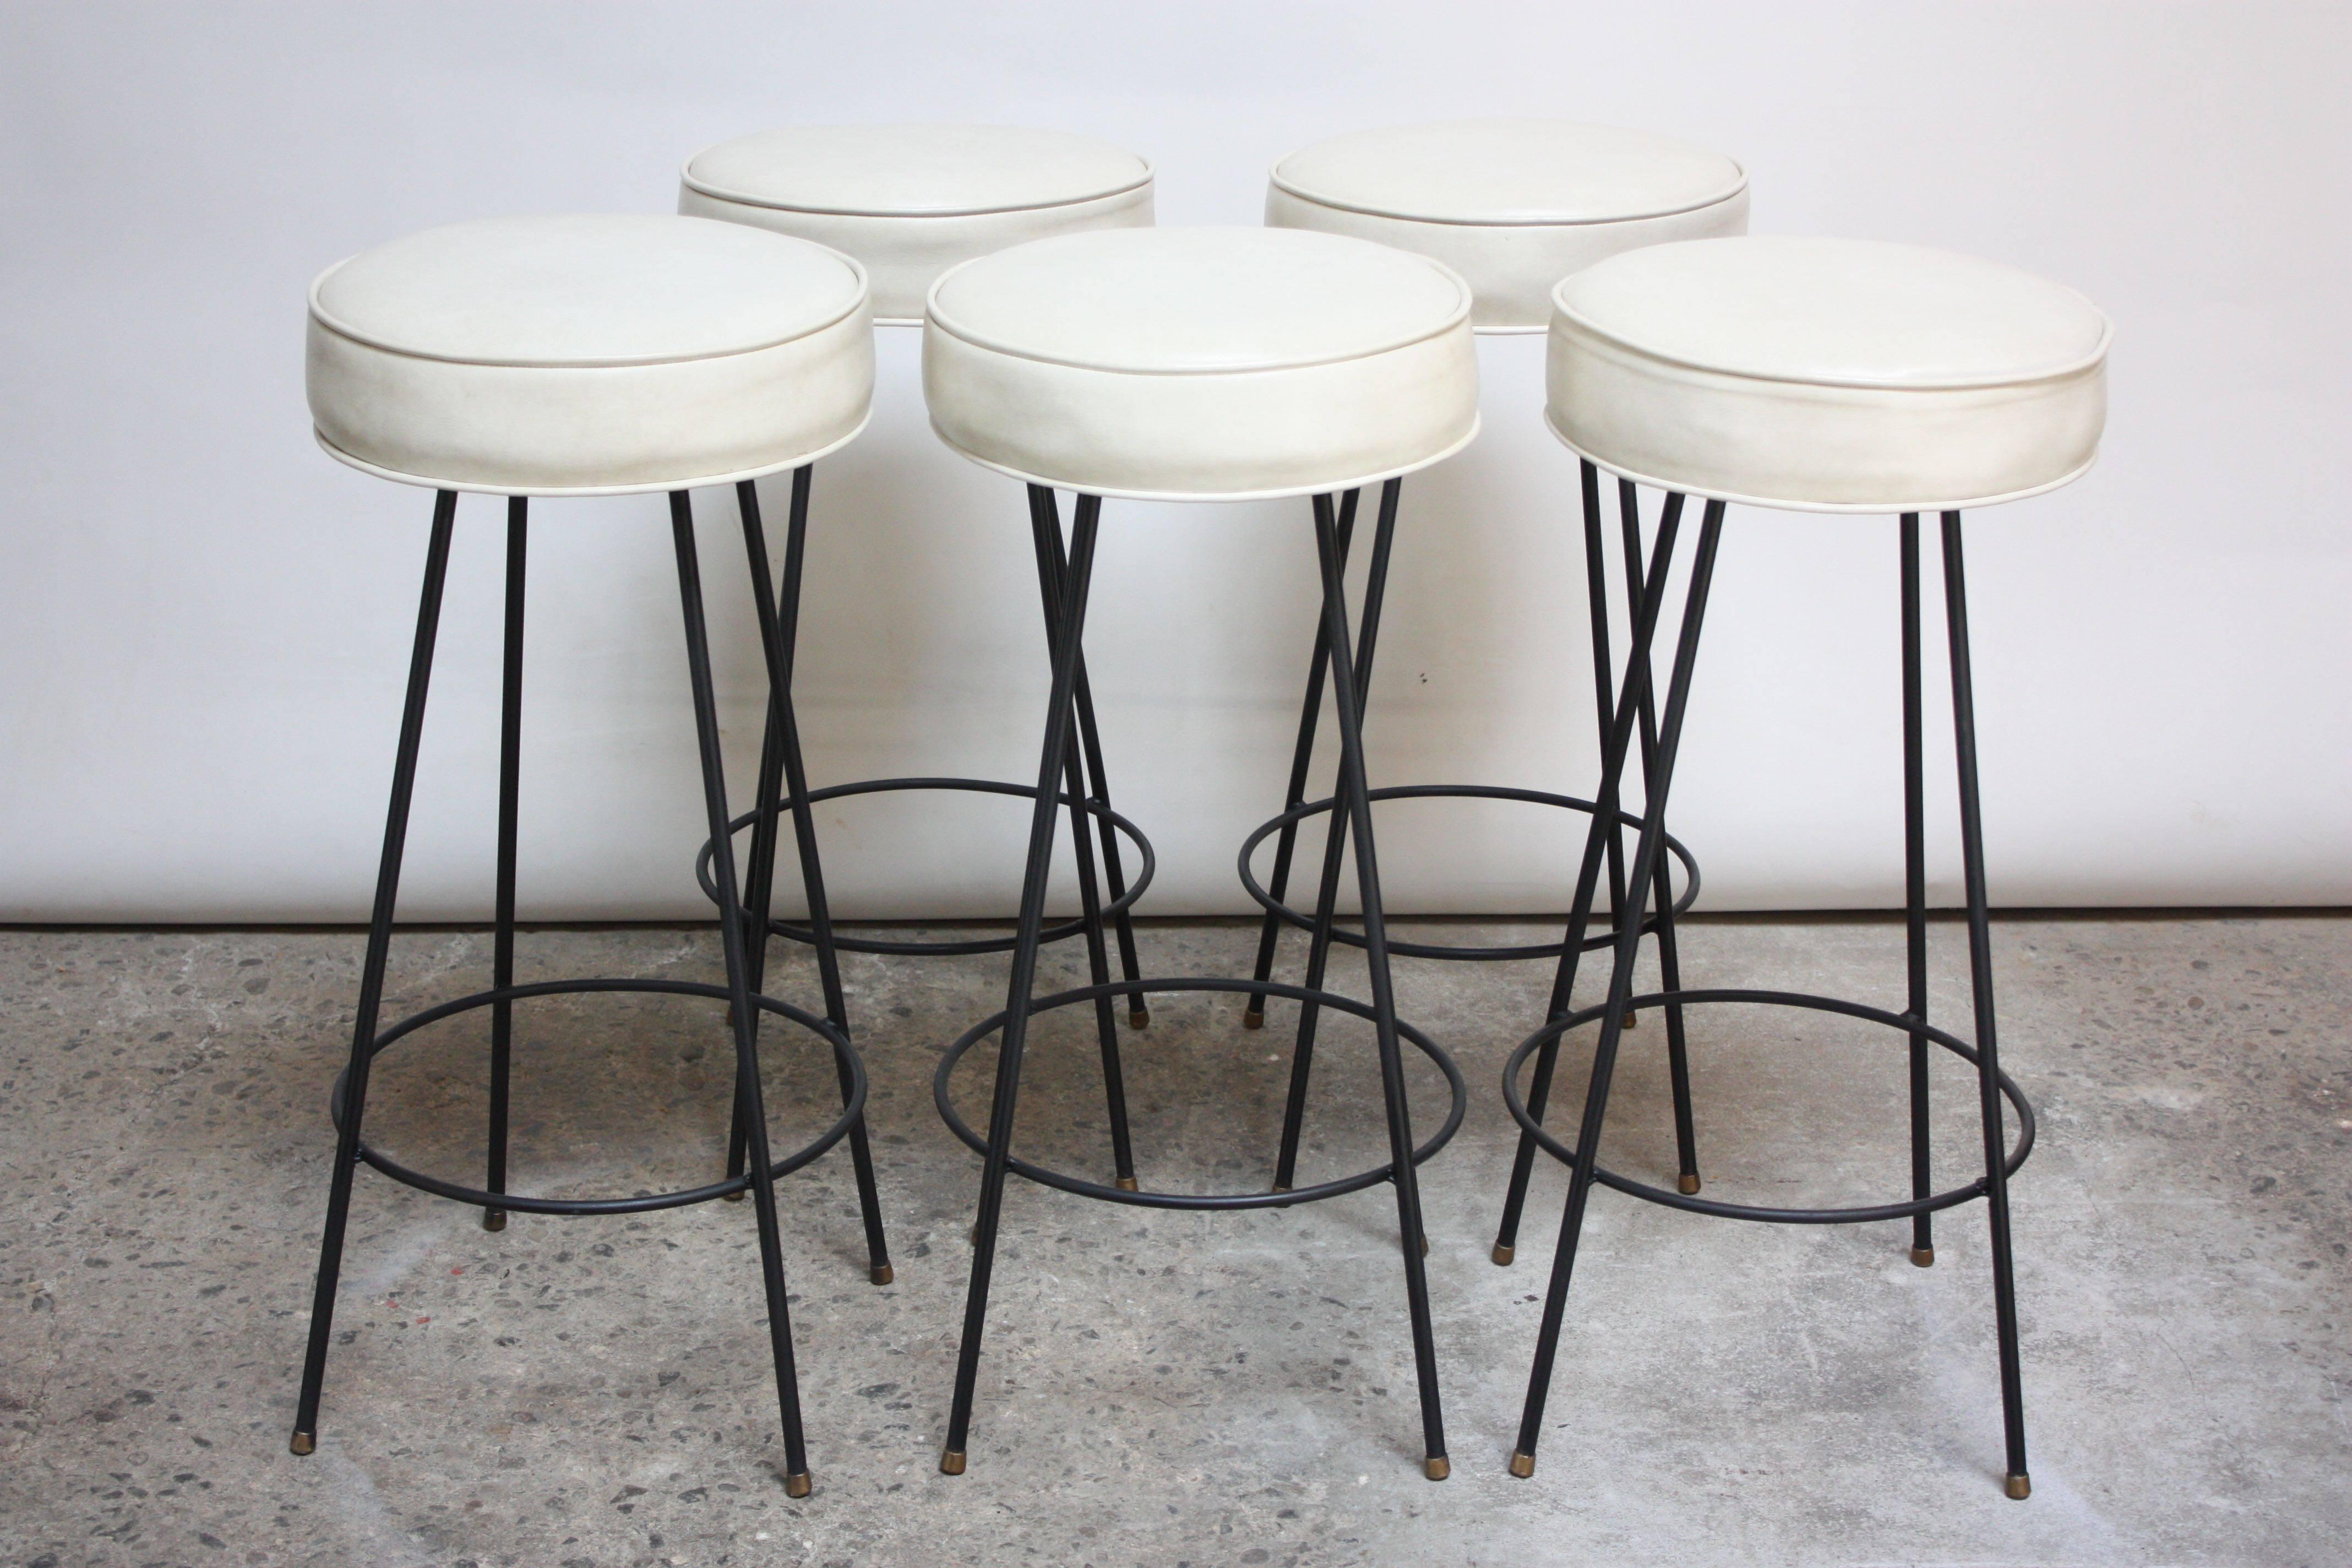 These American modern bar stools are composed of circular vinyl seats supported by four black painted wrought iron legs joined by a circular footrest. The swivel mechanism under the seat allows for full 360 degree rotation. The off-white vinyl is in